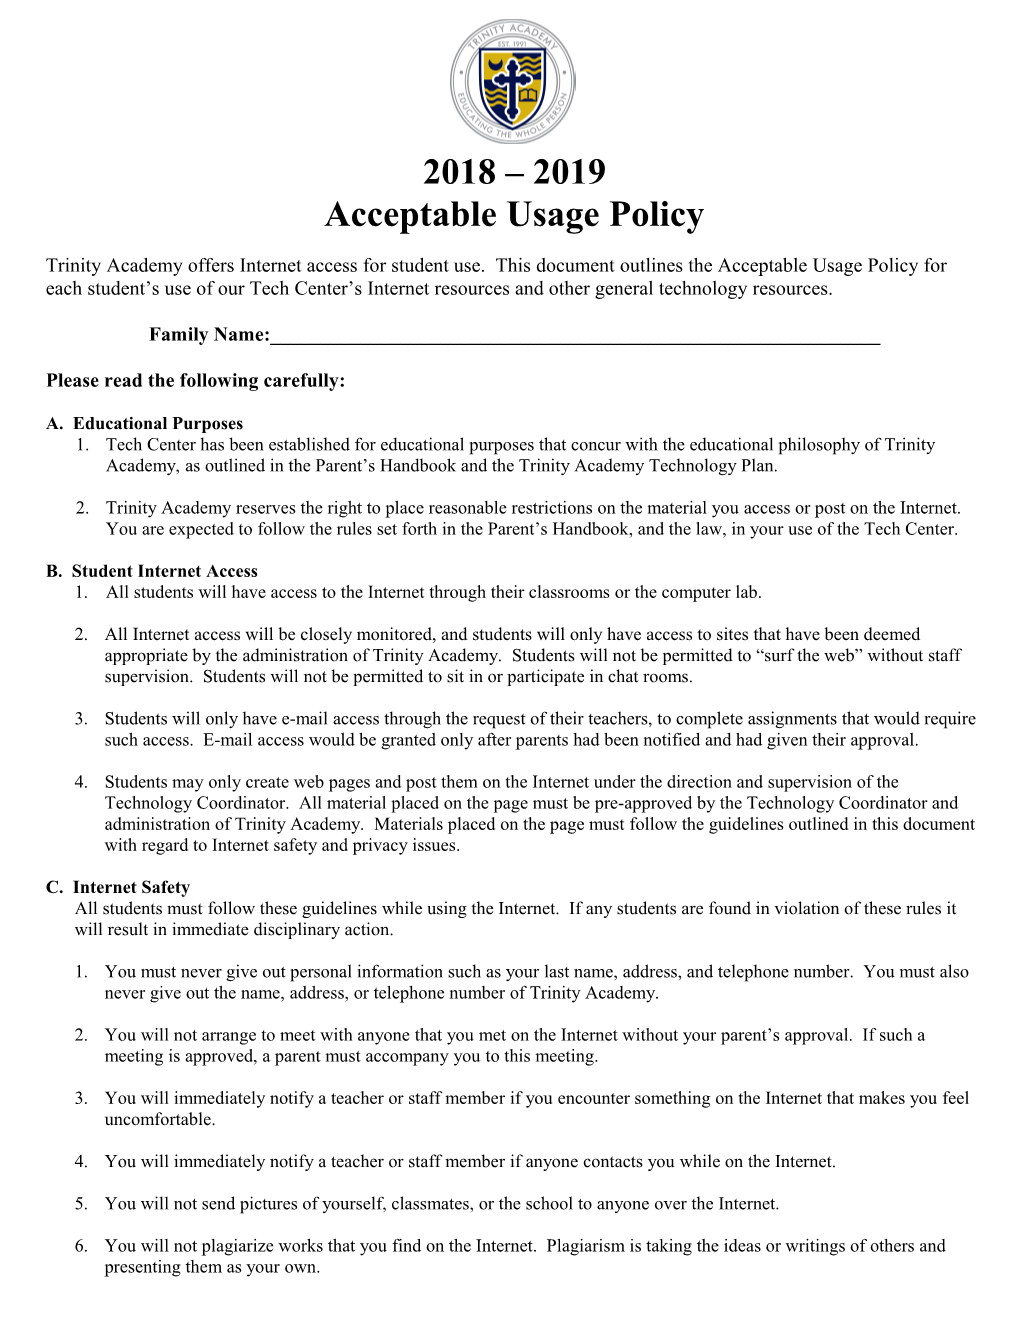 Acceptable Usage Policy